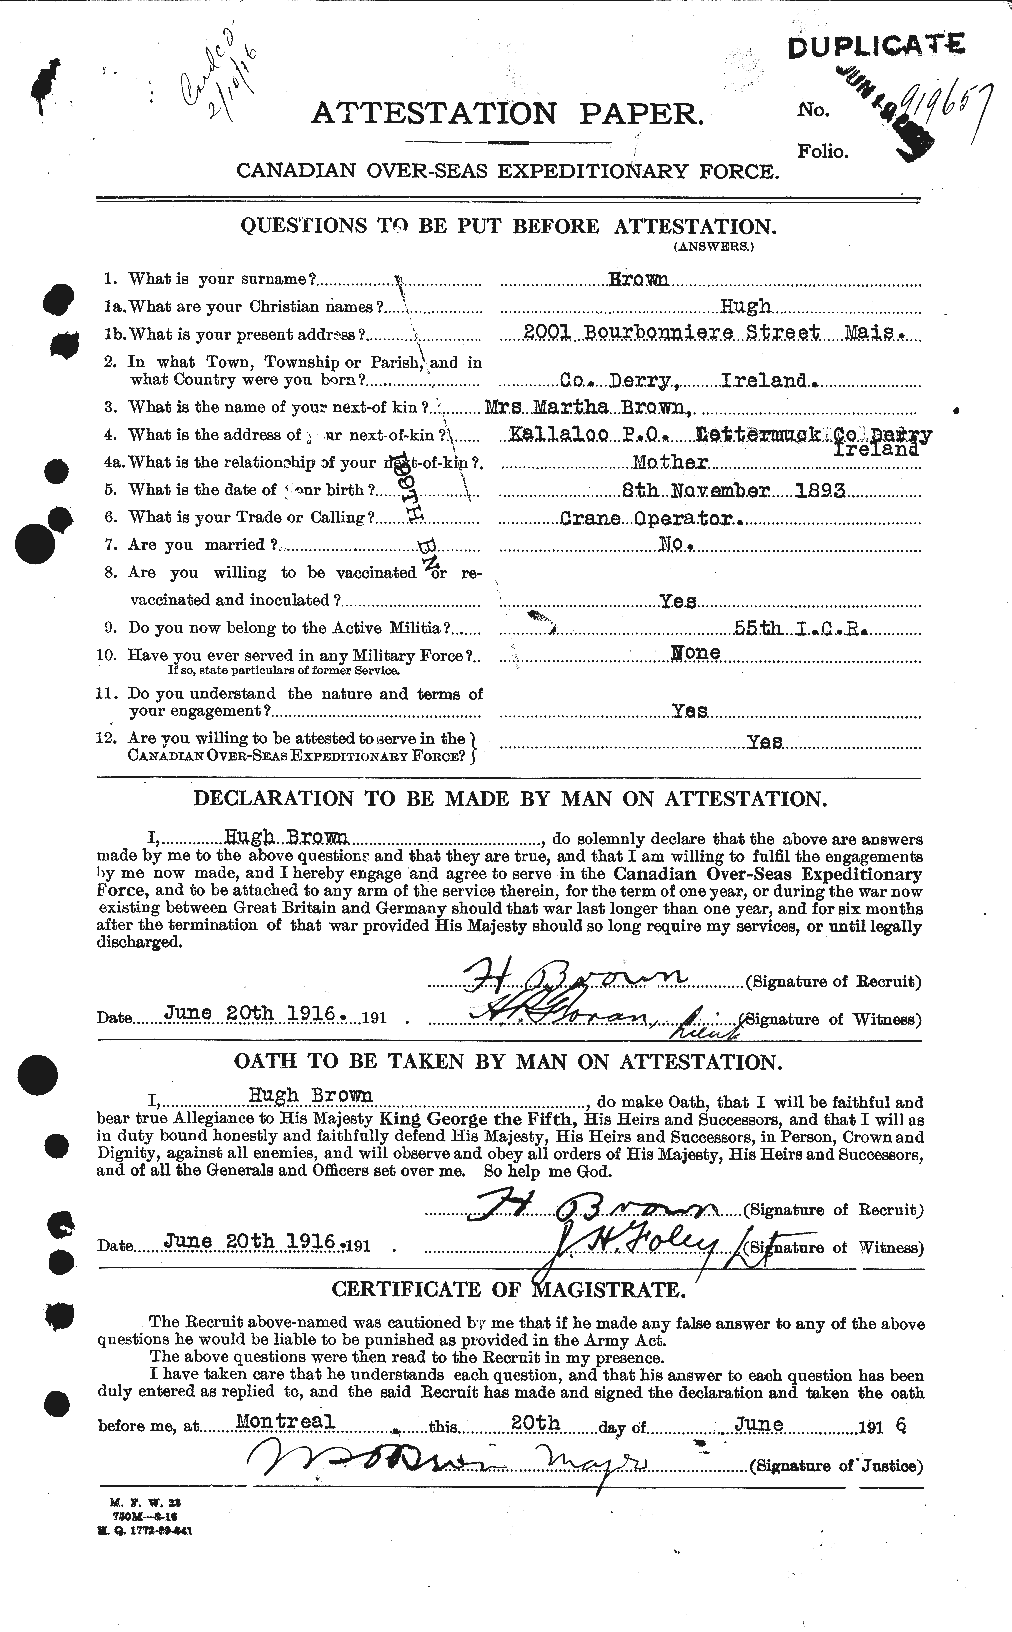 Personnel Records of the First World War - CEF 265637a